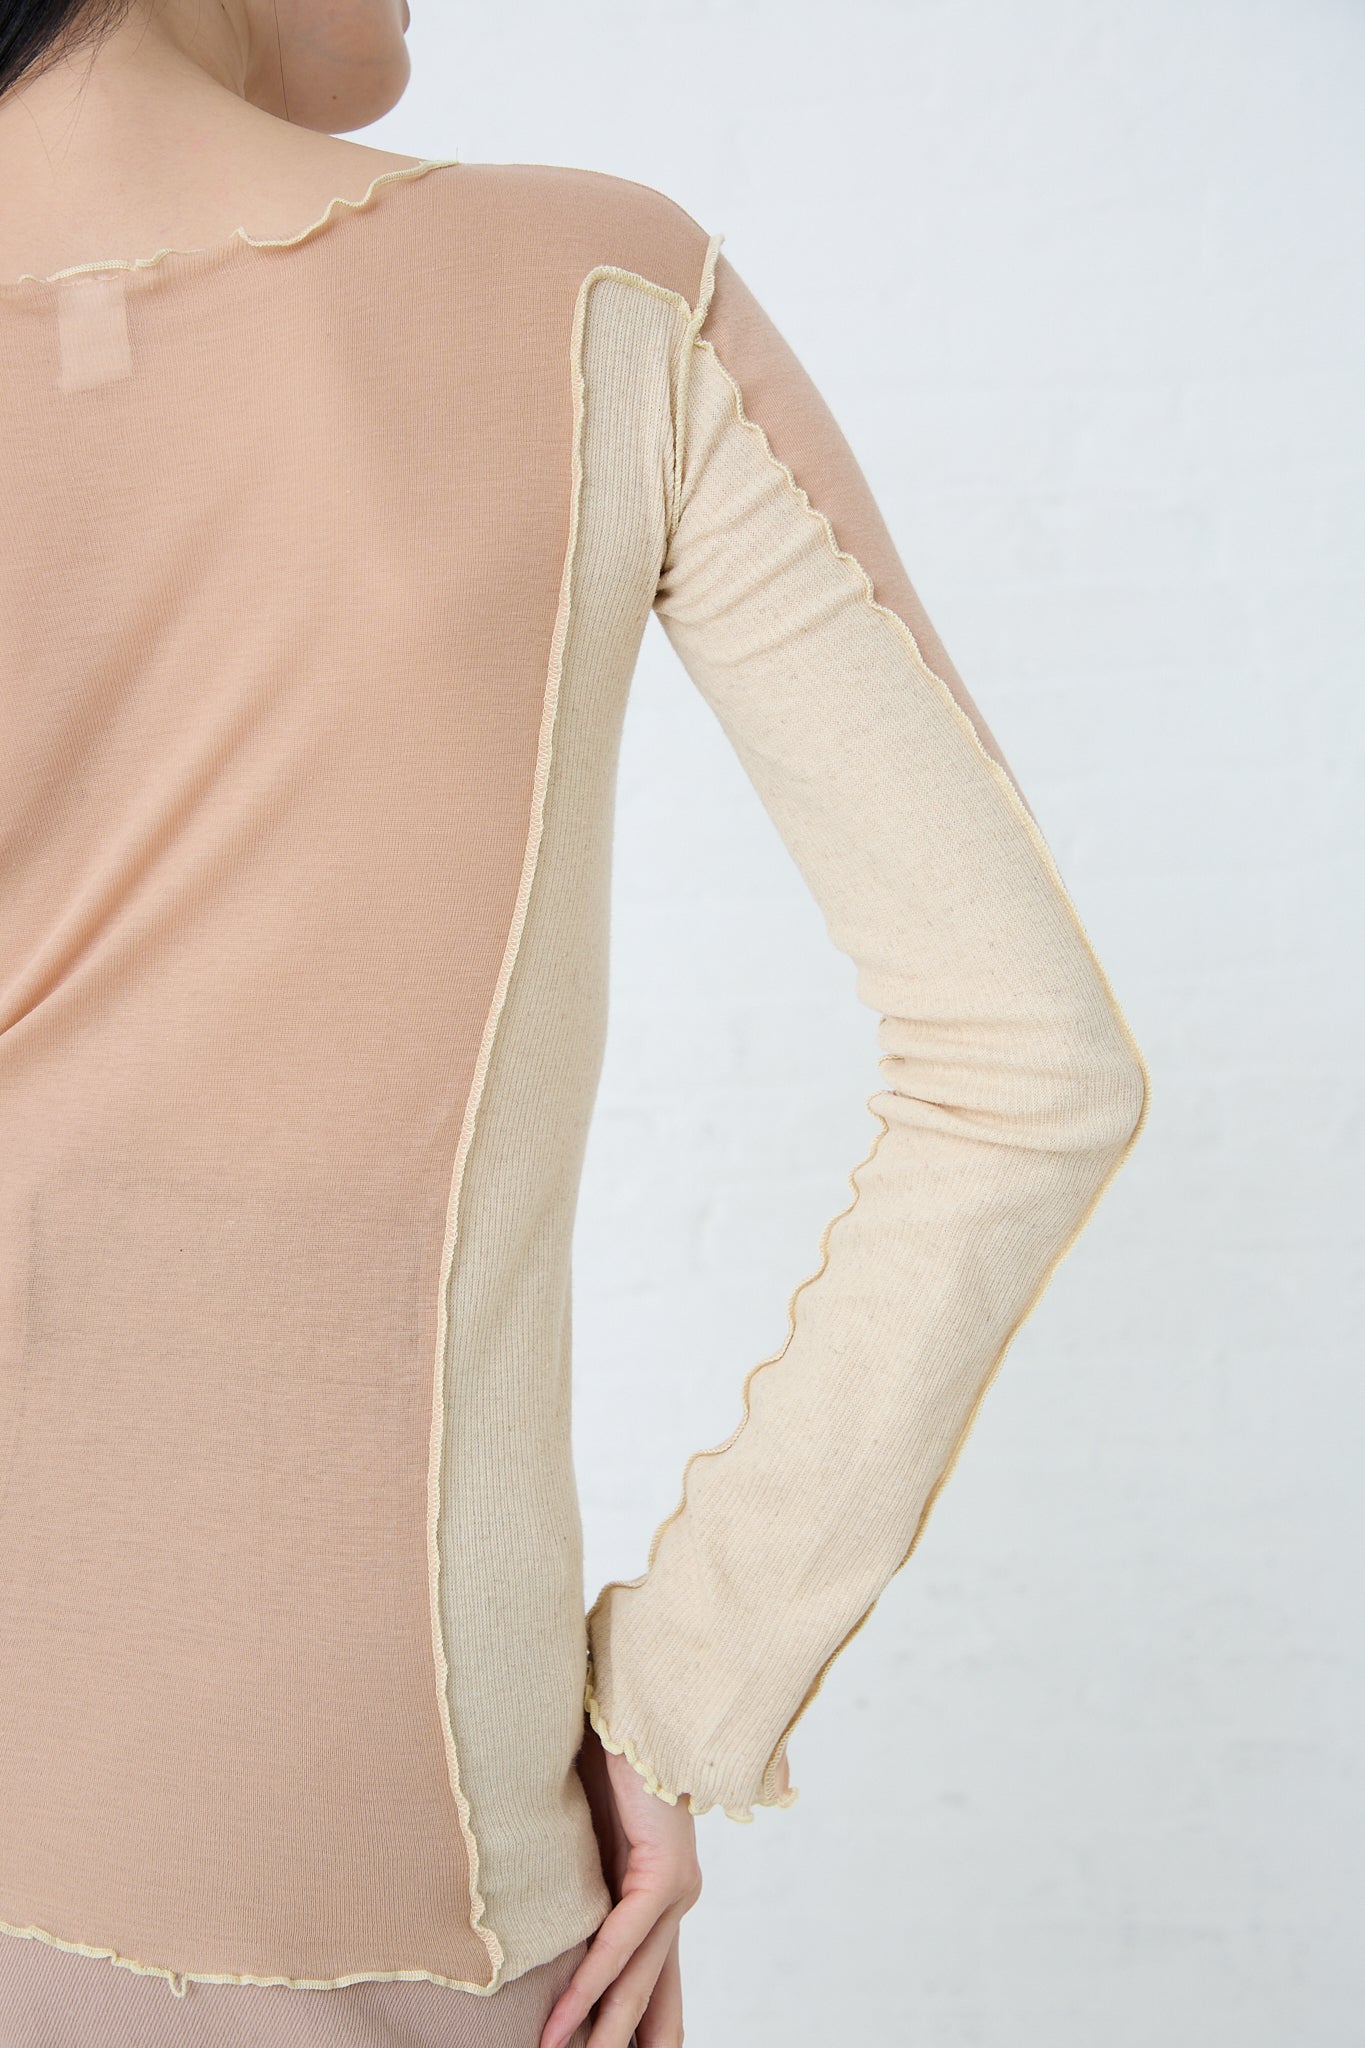 The back view of a woman wearing a Baserange Sun Longsleeve in Rosy Camel. Up close view of back and sleeve details.